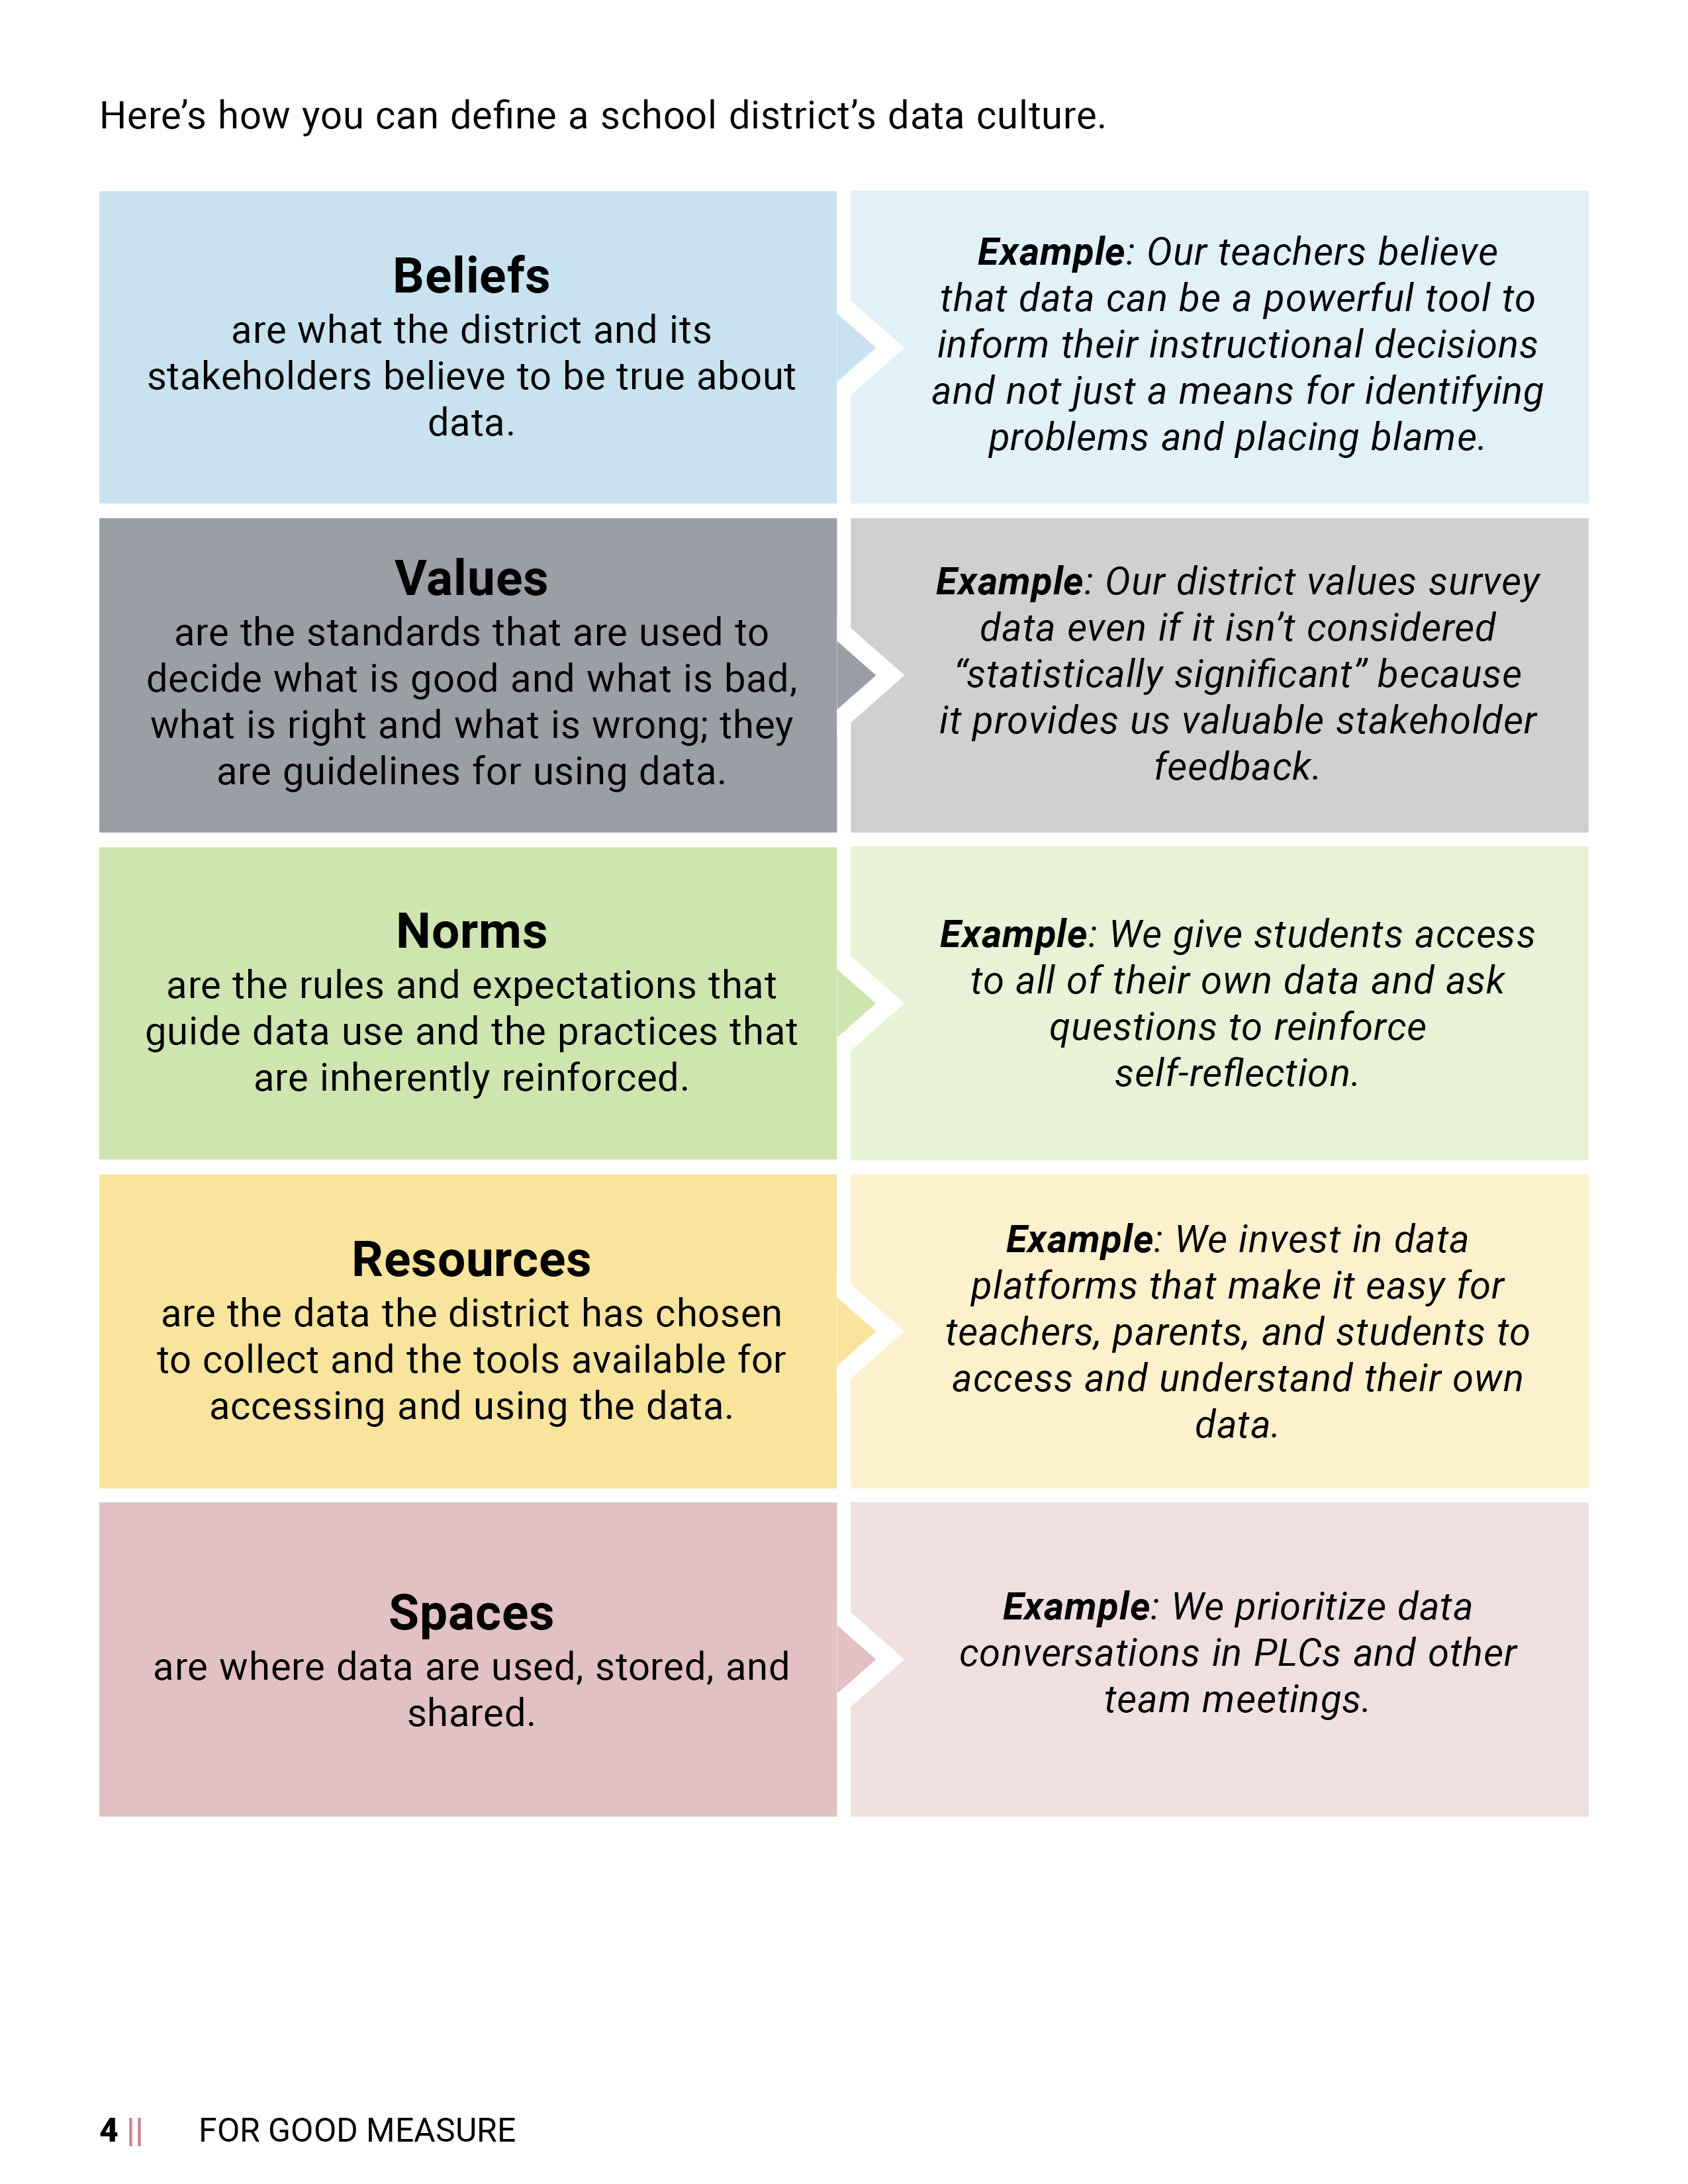 For Good Measure - Data Culture Guide page 4